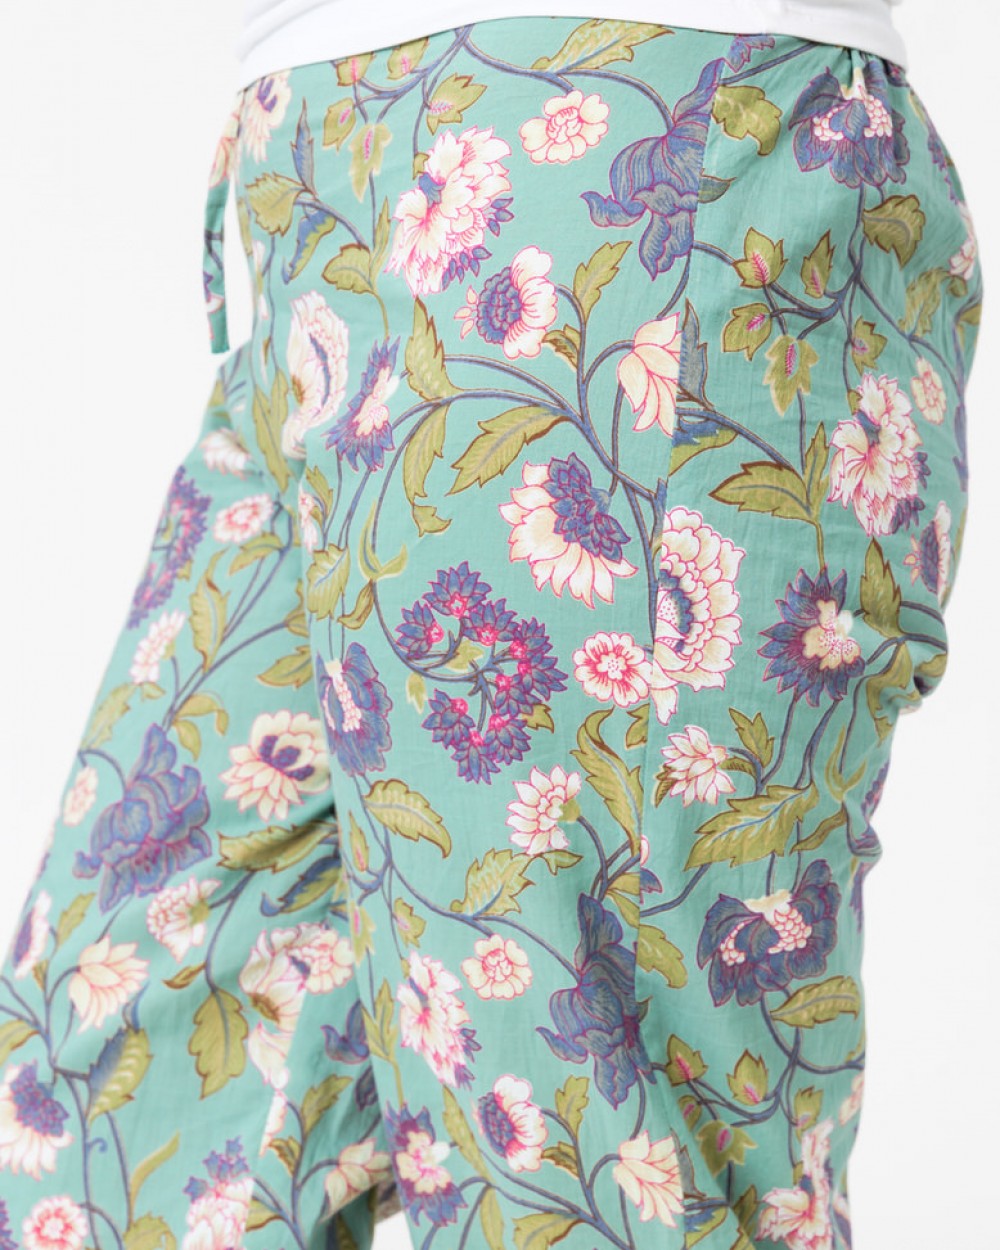 Lily Aqua lounge pants in cotton from Floressents